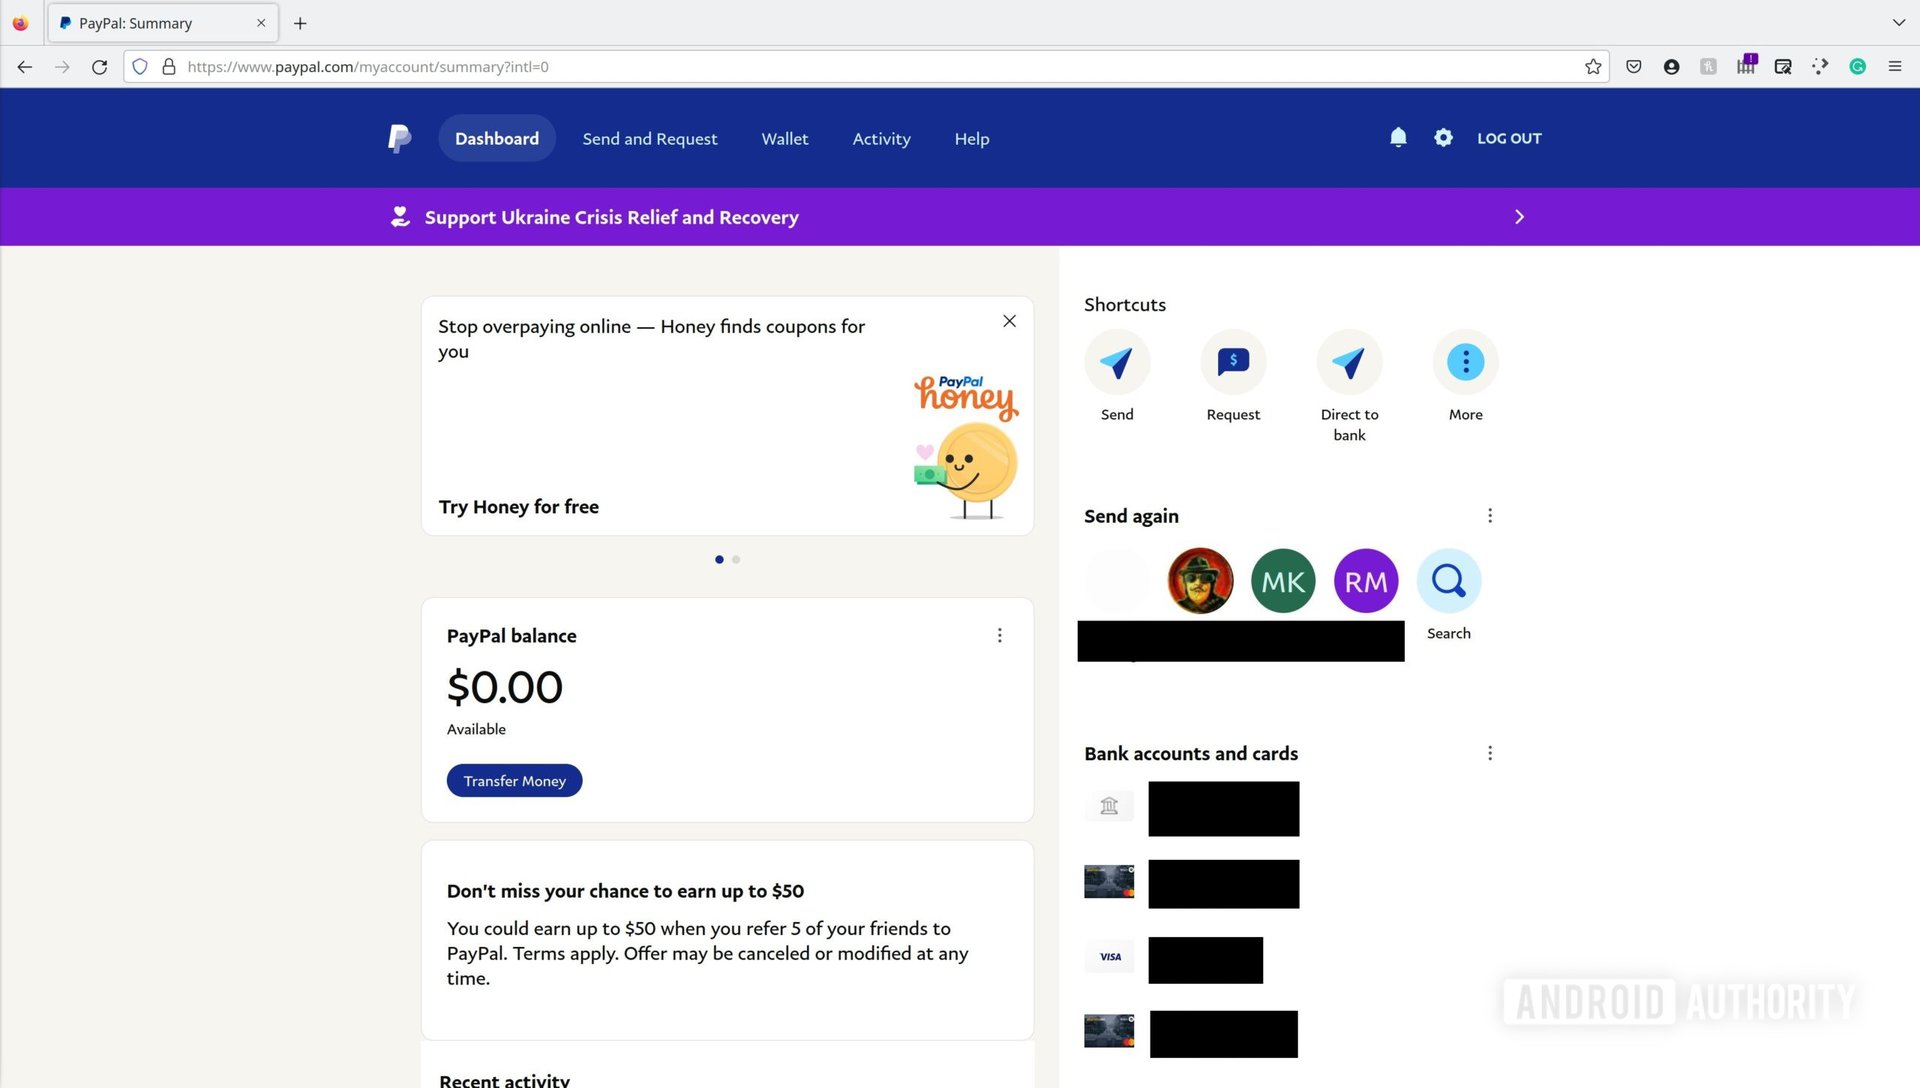 How can I check the balance on my PayPal gift card?, by Eric